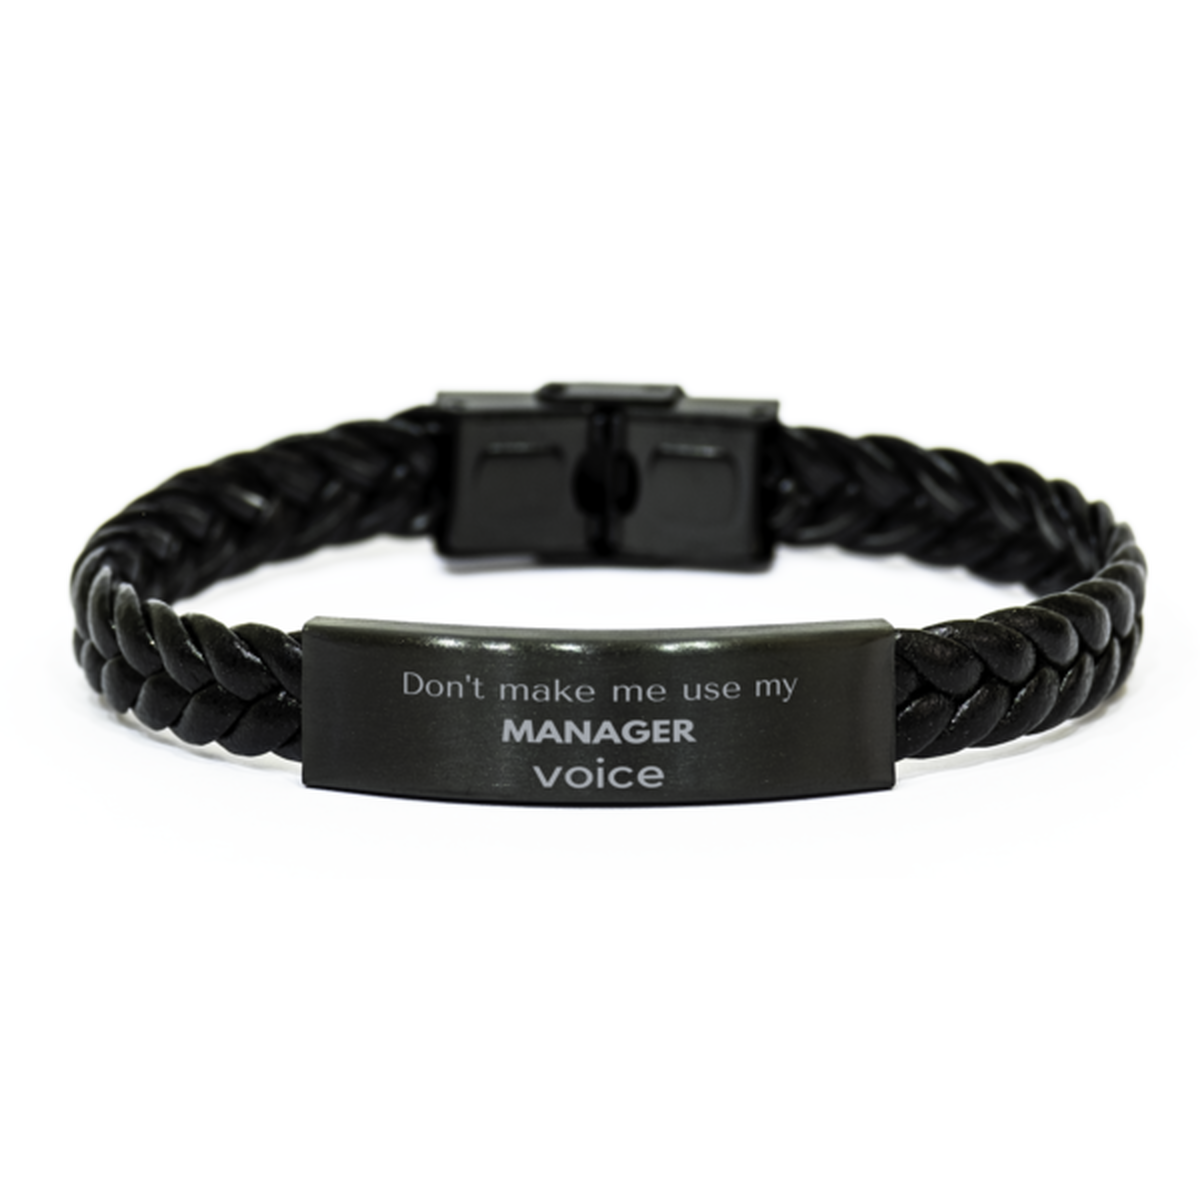 Don't make me use my Manager voice, Sarcasm Manager Gifts, Christmas Manager Braided Leather Bracelet Birthday Unique Gifts For Manager Coworkers, Men, Women, Colleague, Friends